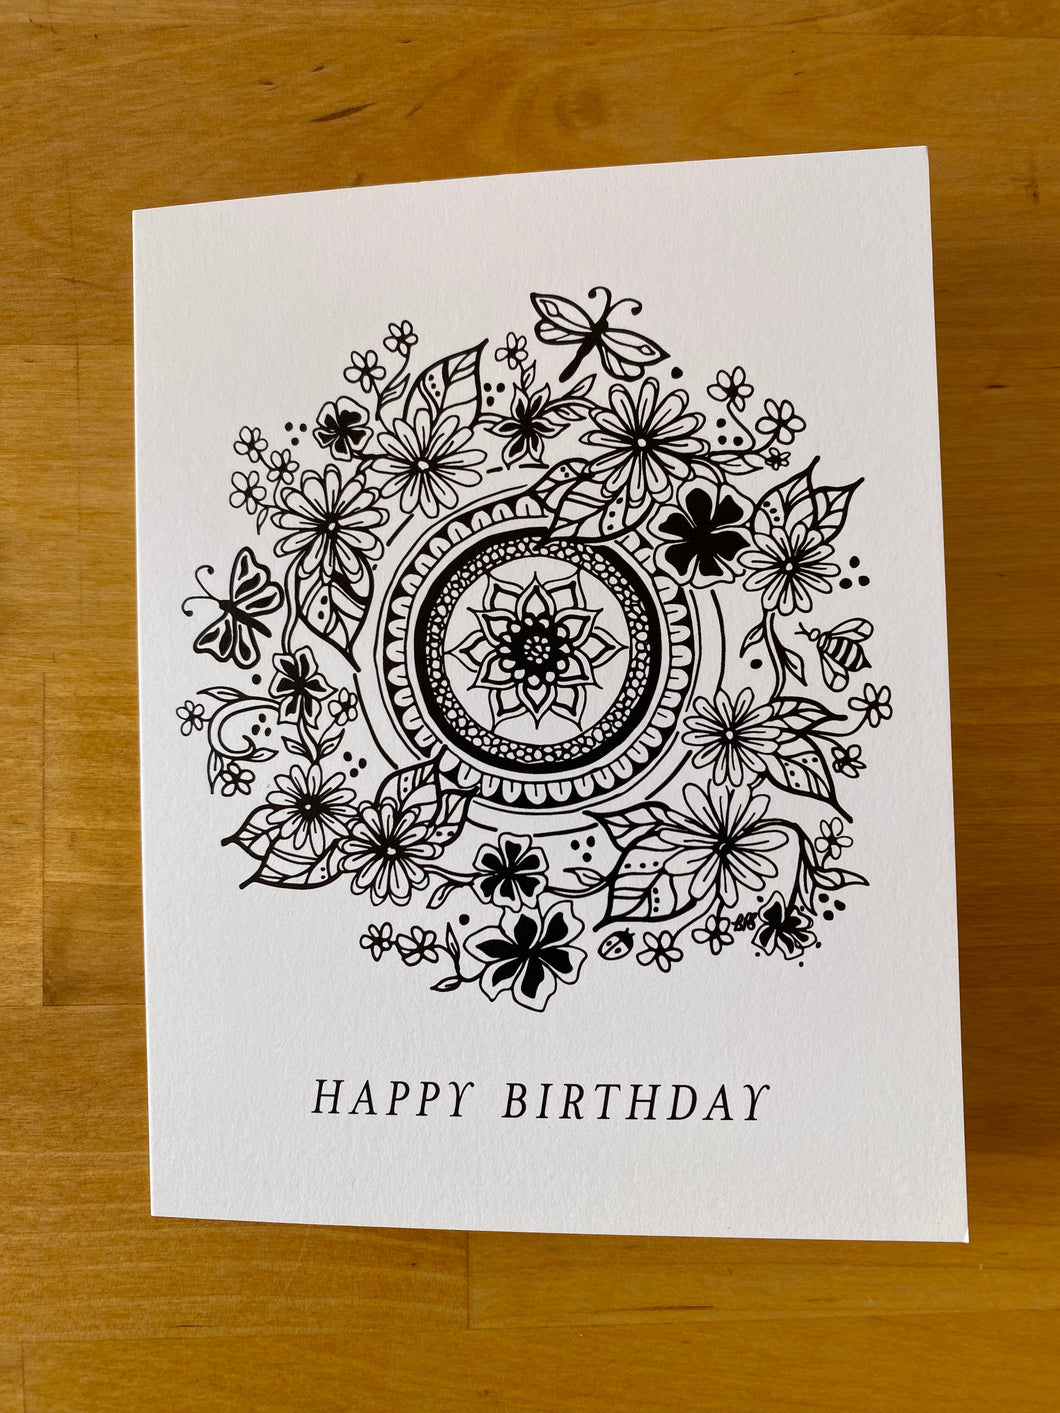 Image of the Happy Birthday Card